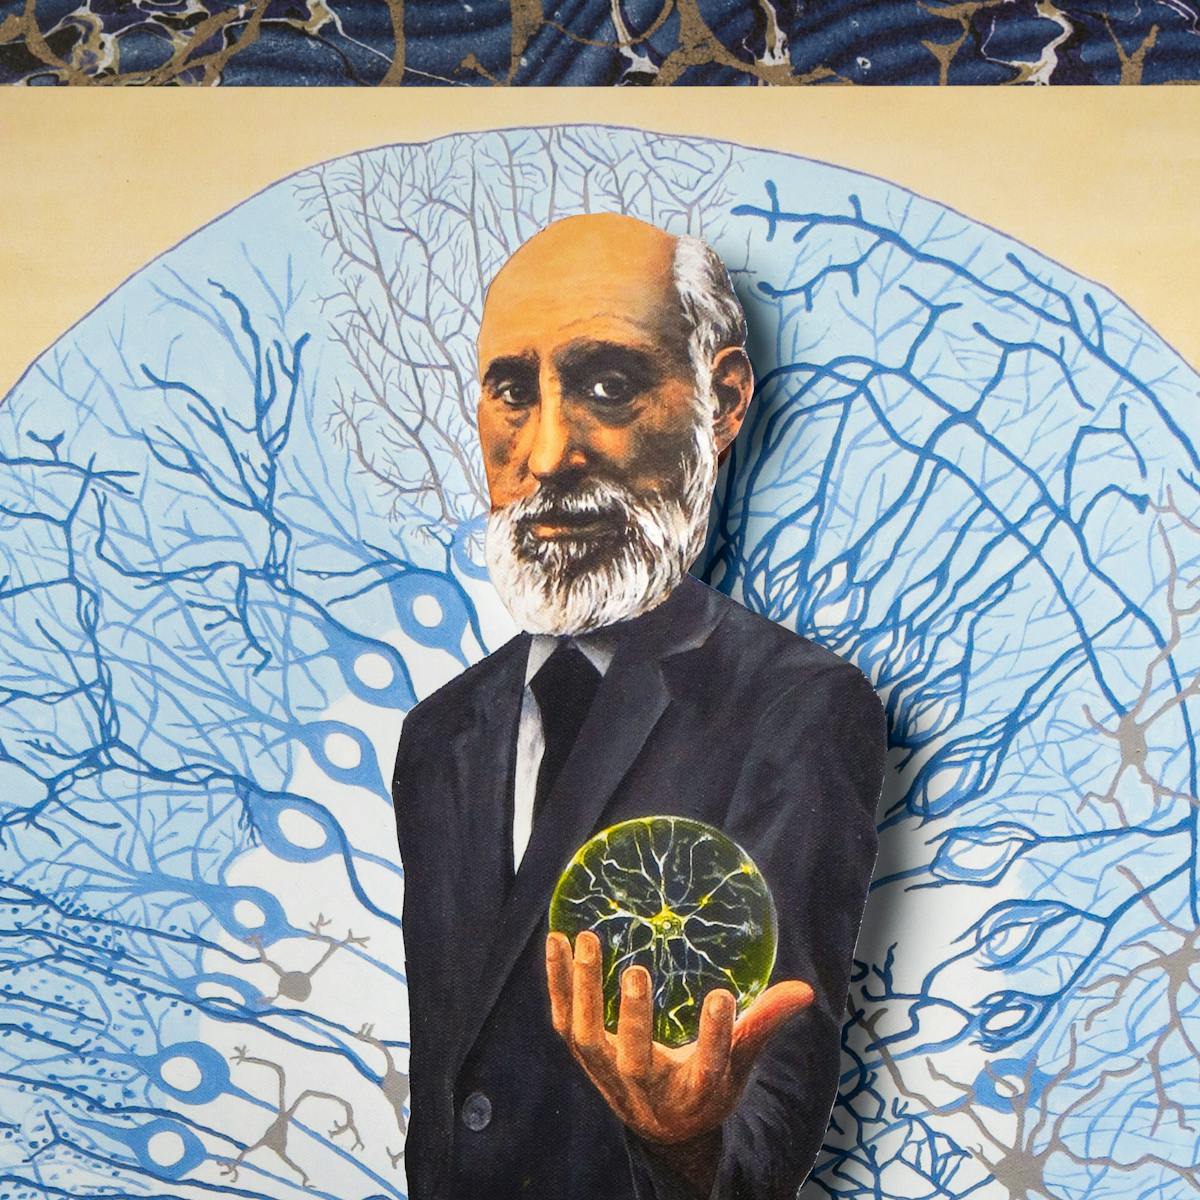 An illustration of an old white man, with a white beard, wearing a dark suit. The man is holding a yellow orb shaped object depicting a biological cell with a spider-like group of neural pathways.